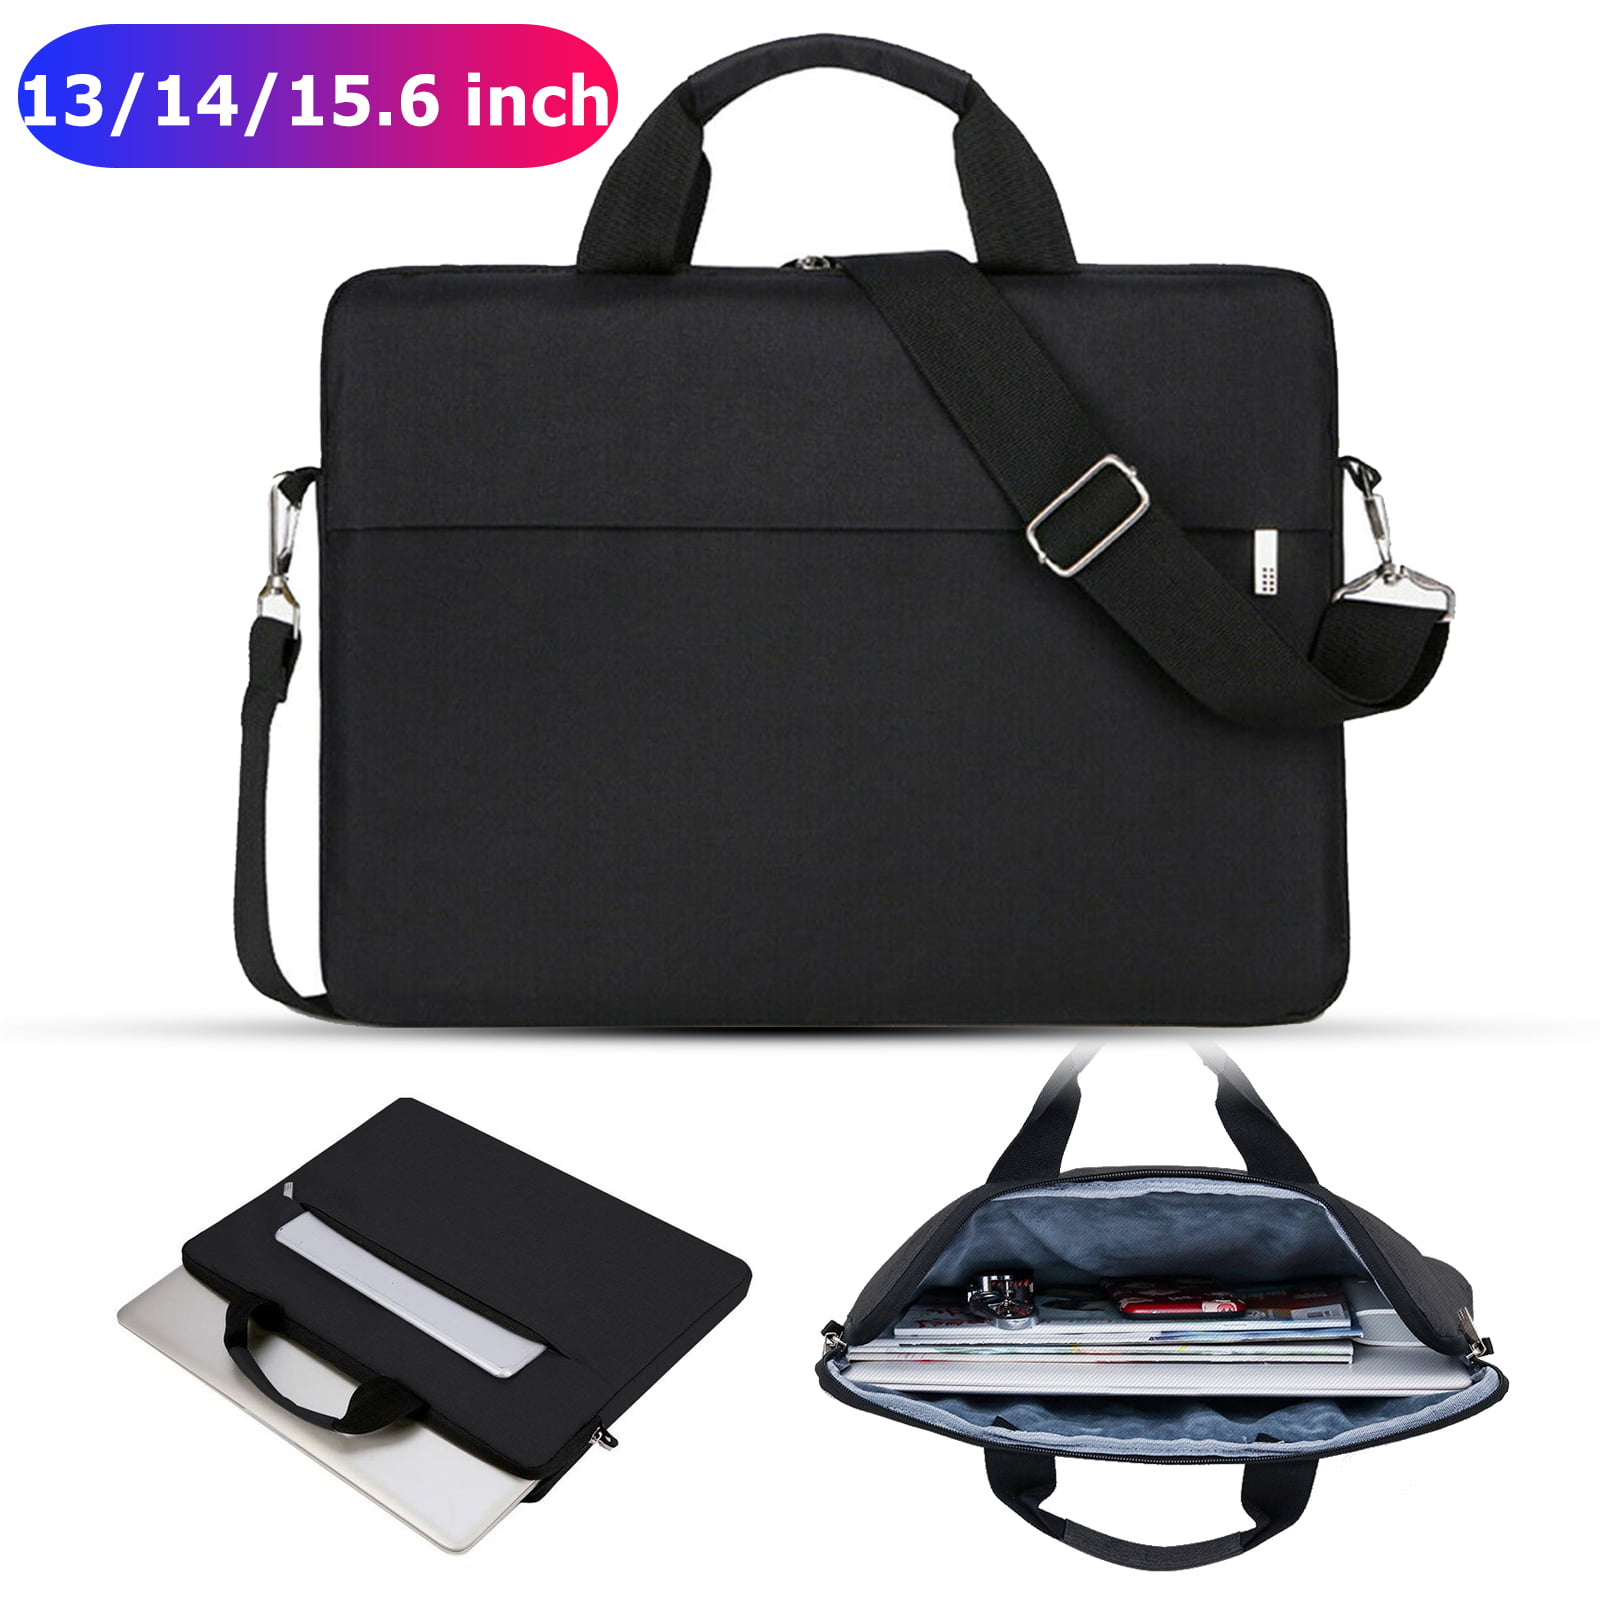 Laptop Case Computer Bag Sleeve Cover Bear Picture Waterproof Shoulder Briefcase 13 14 15.6 Inch 